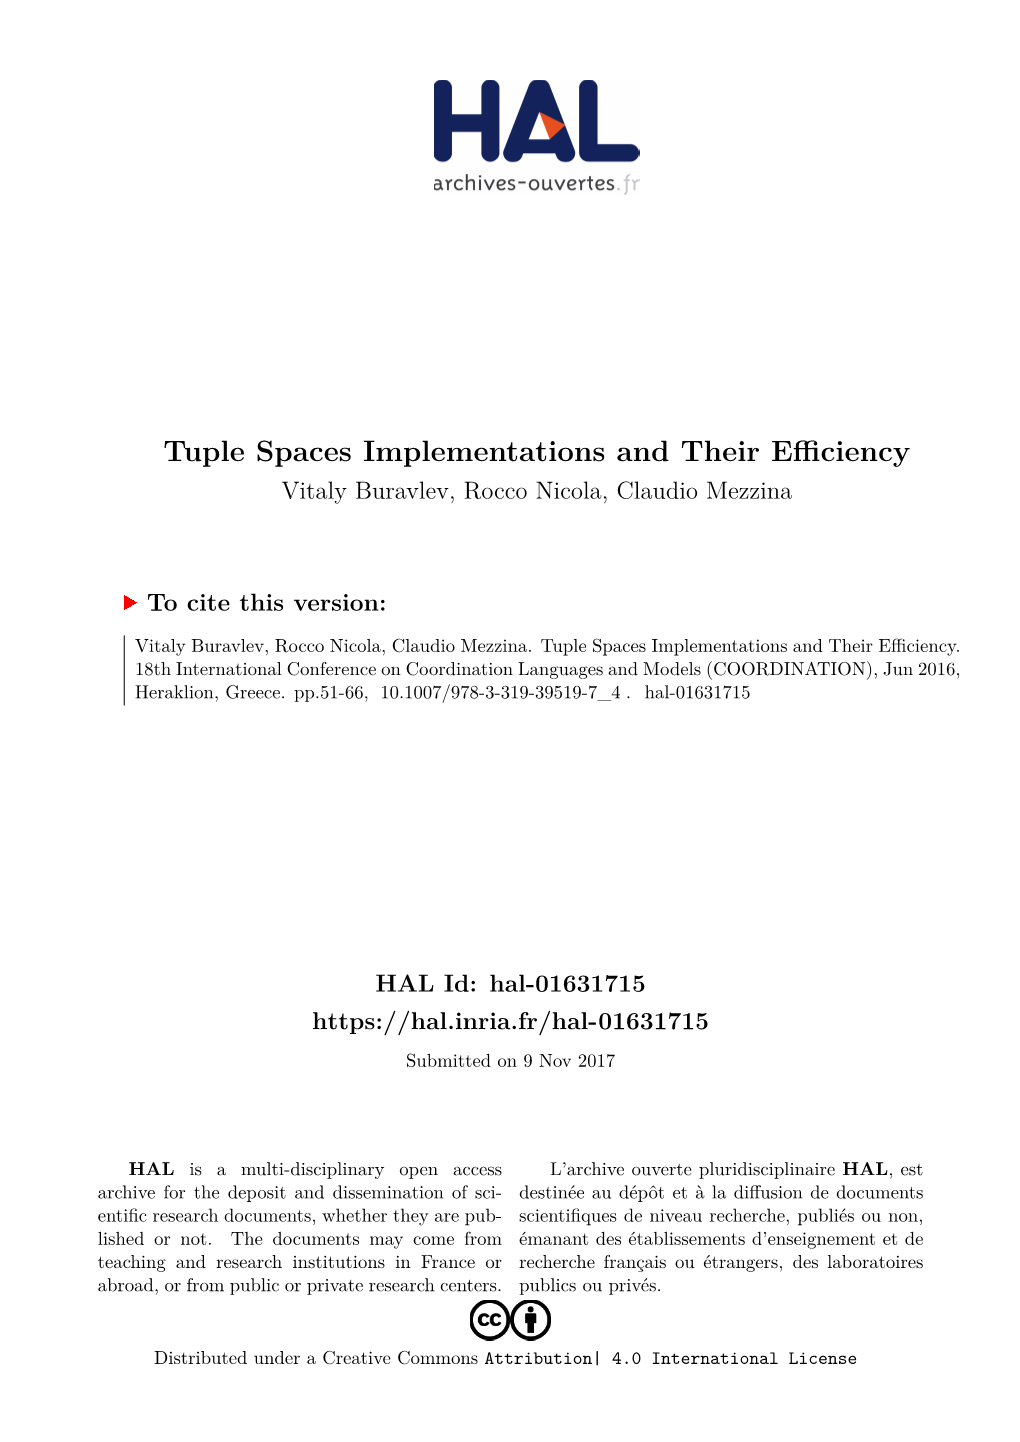 Tuple Spaces Implementations and Their Efficiency